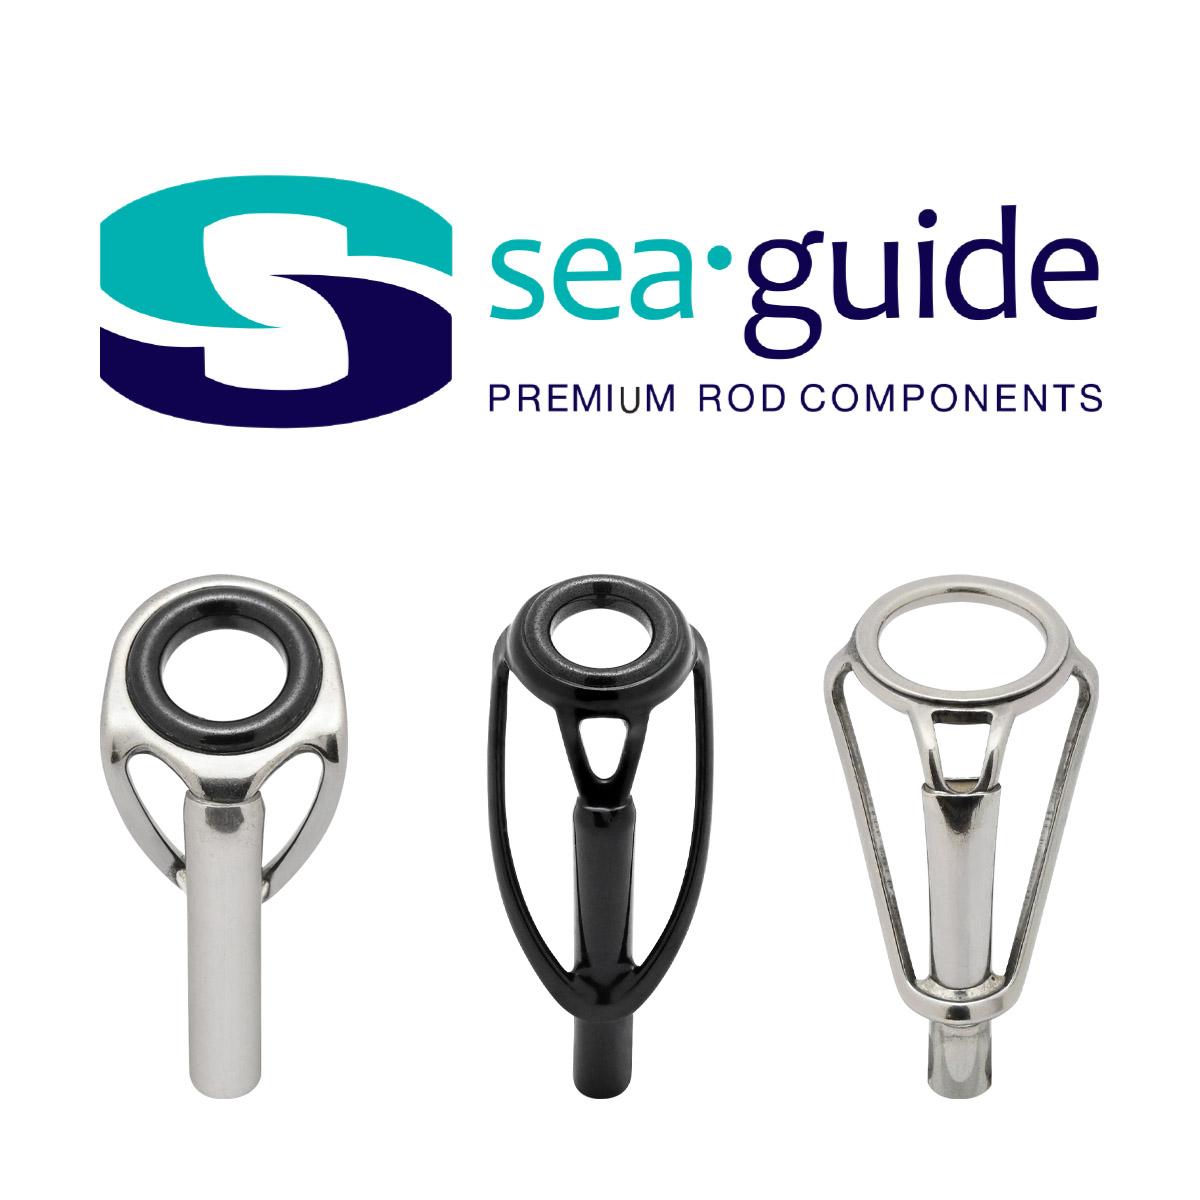 Seaguide Rod Tip Tops